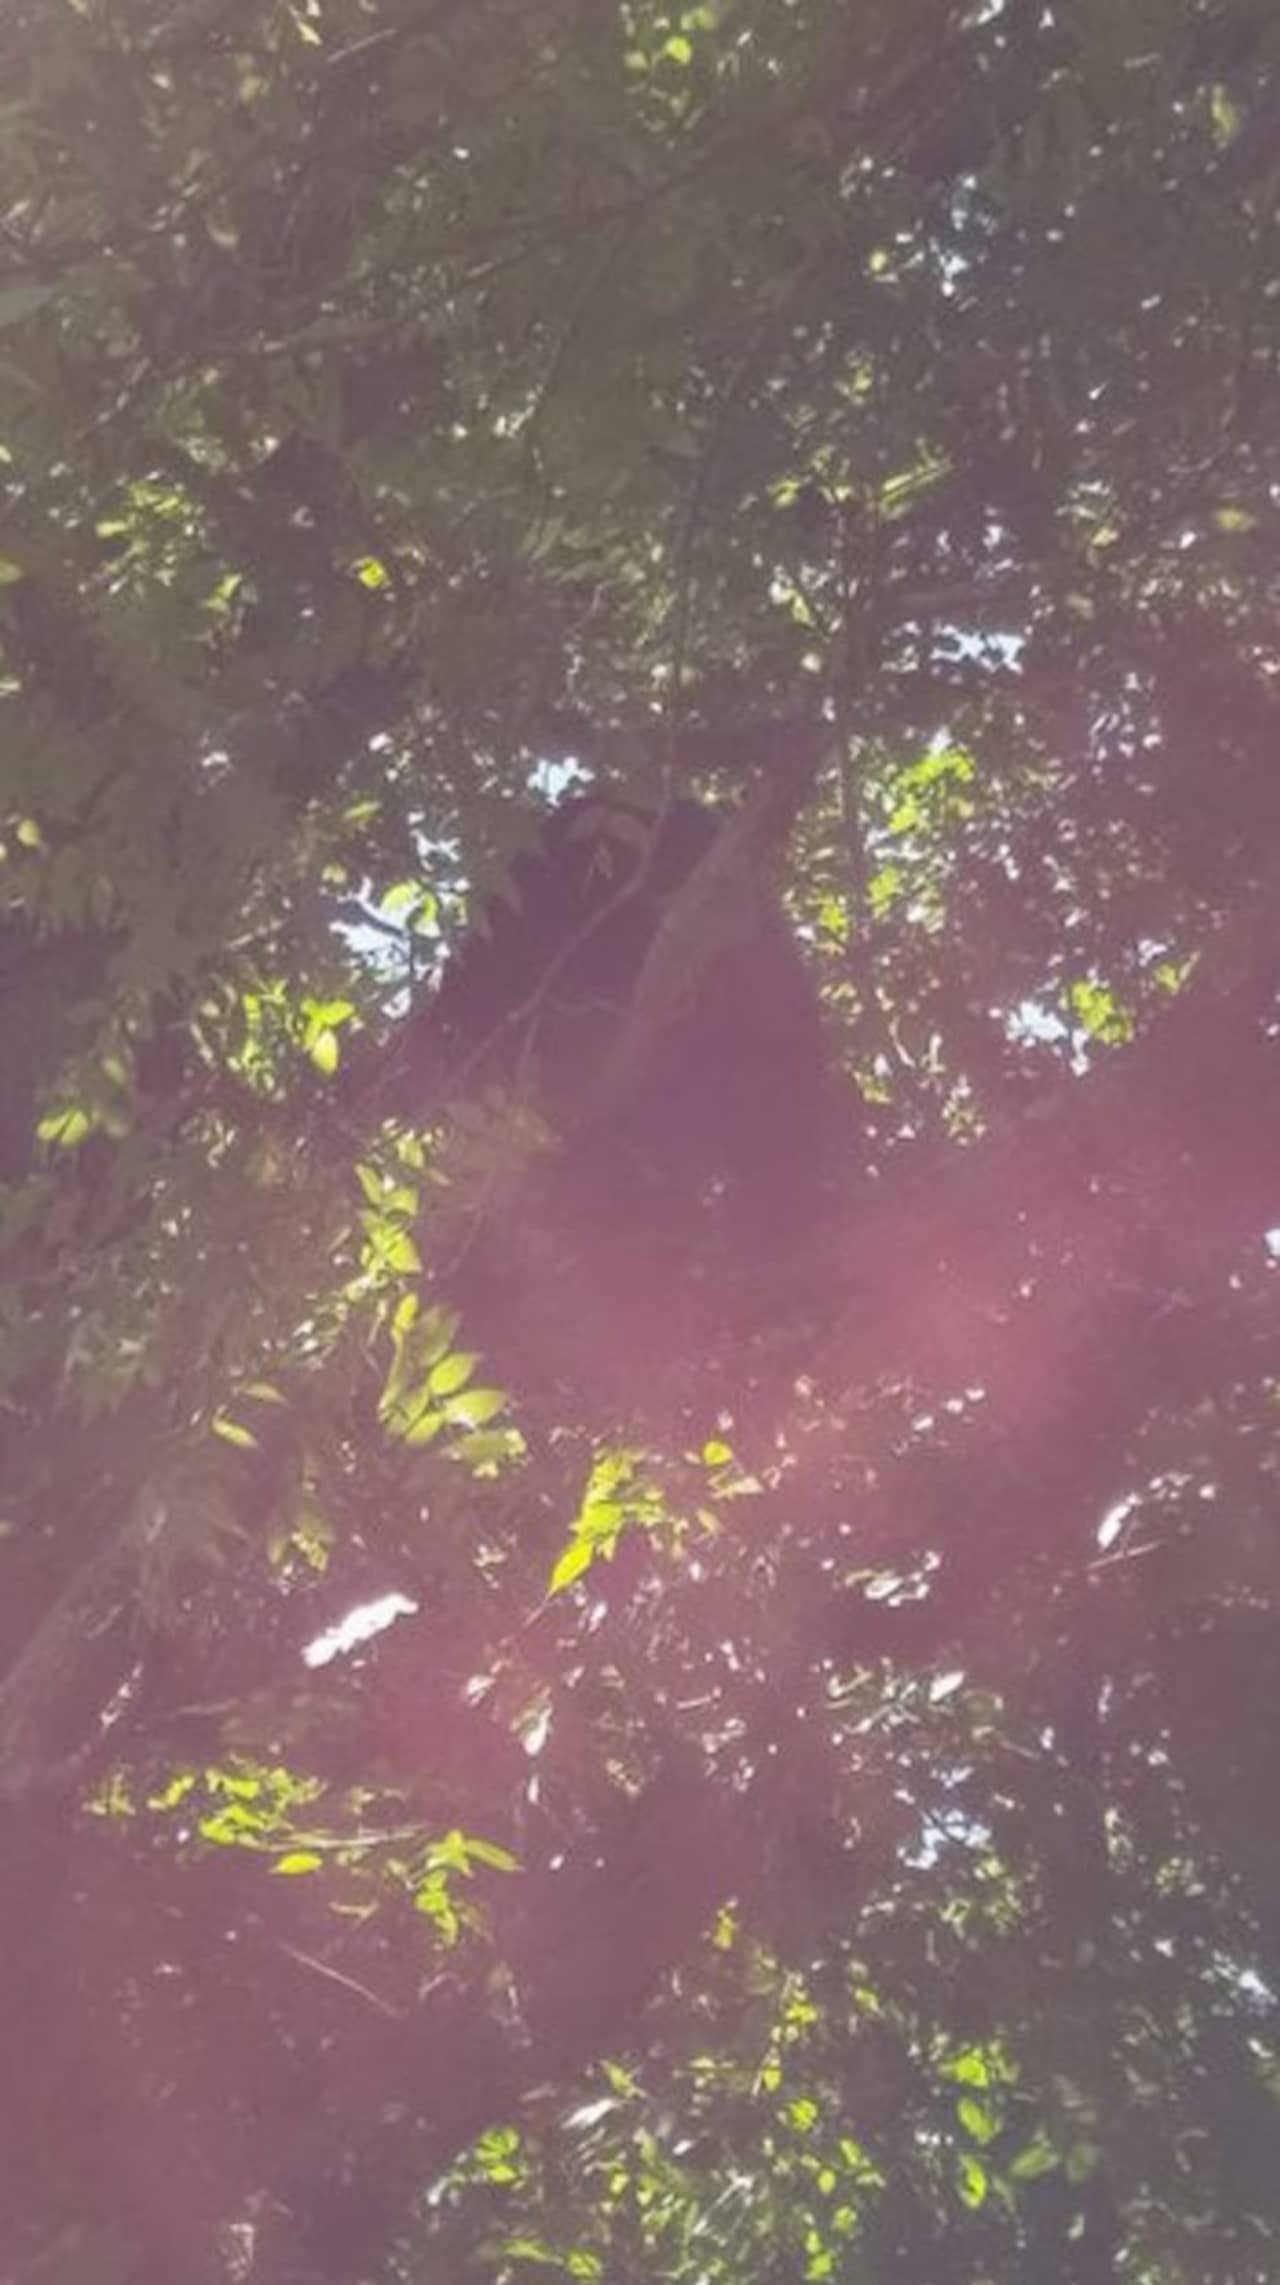 Officials are not sure if a bear that was tranquilized in a tree in Danbury on Friday morning and moved to the woods, is the same one that was hit and killed in Newtown later in the day.